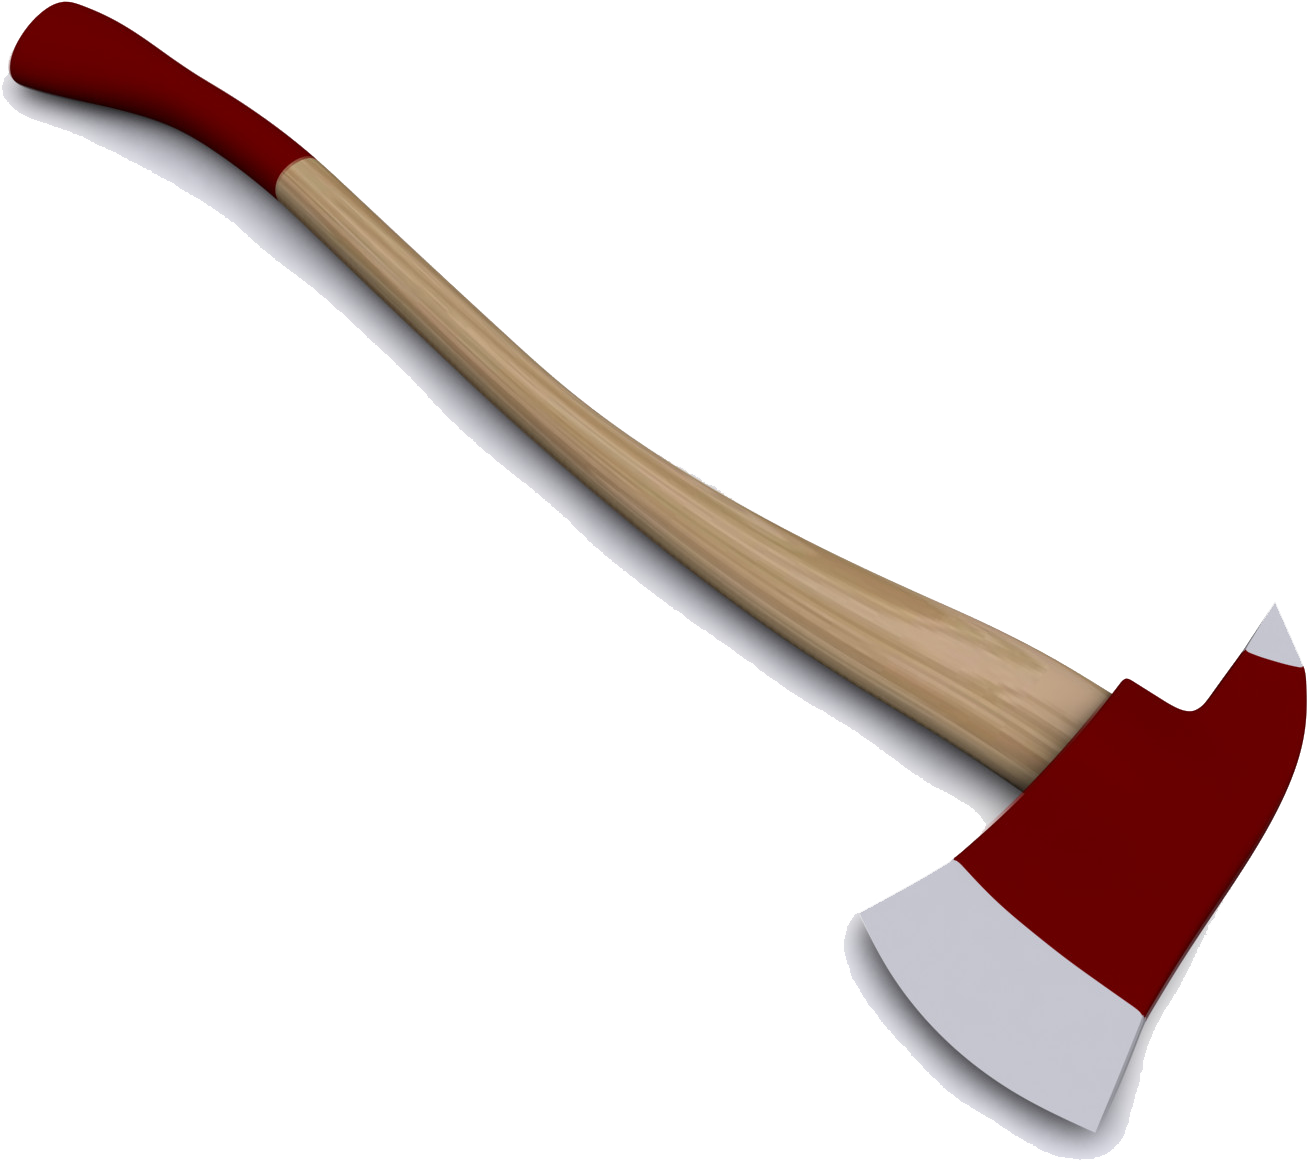 Firefighter Axe Png Pic - Png All Image Download (1600x1600)